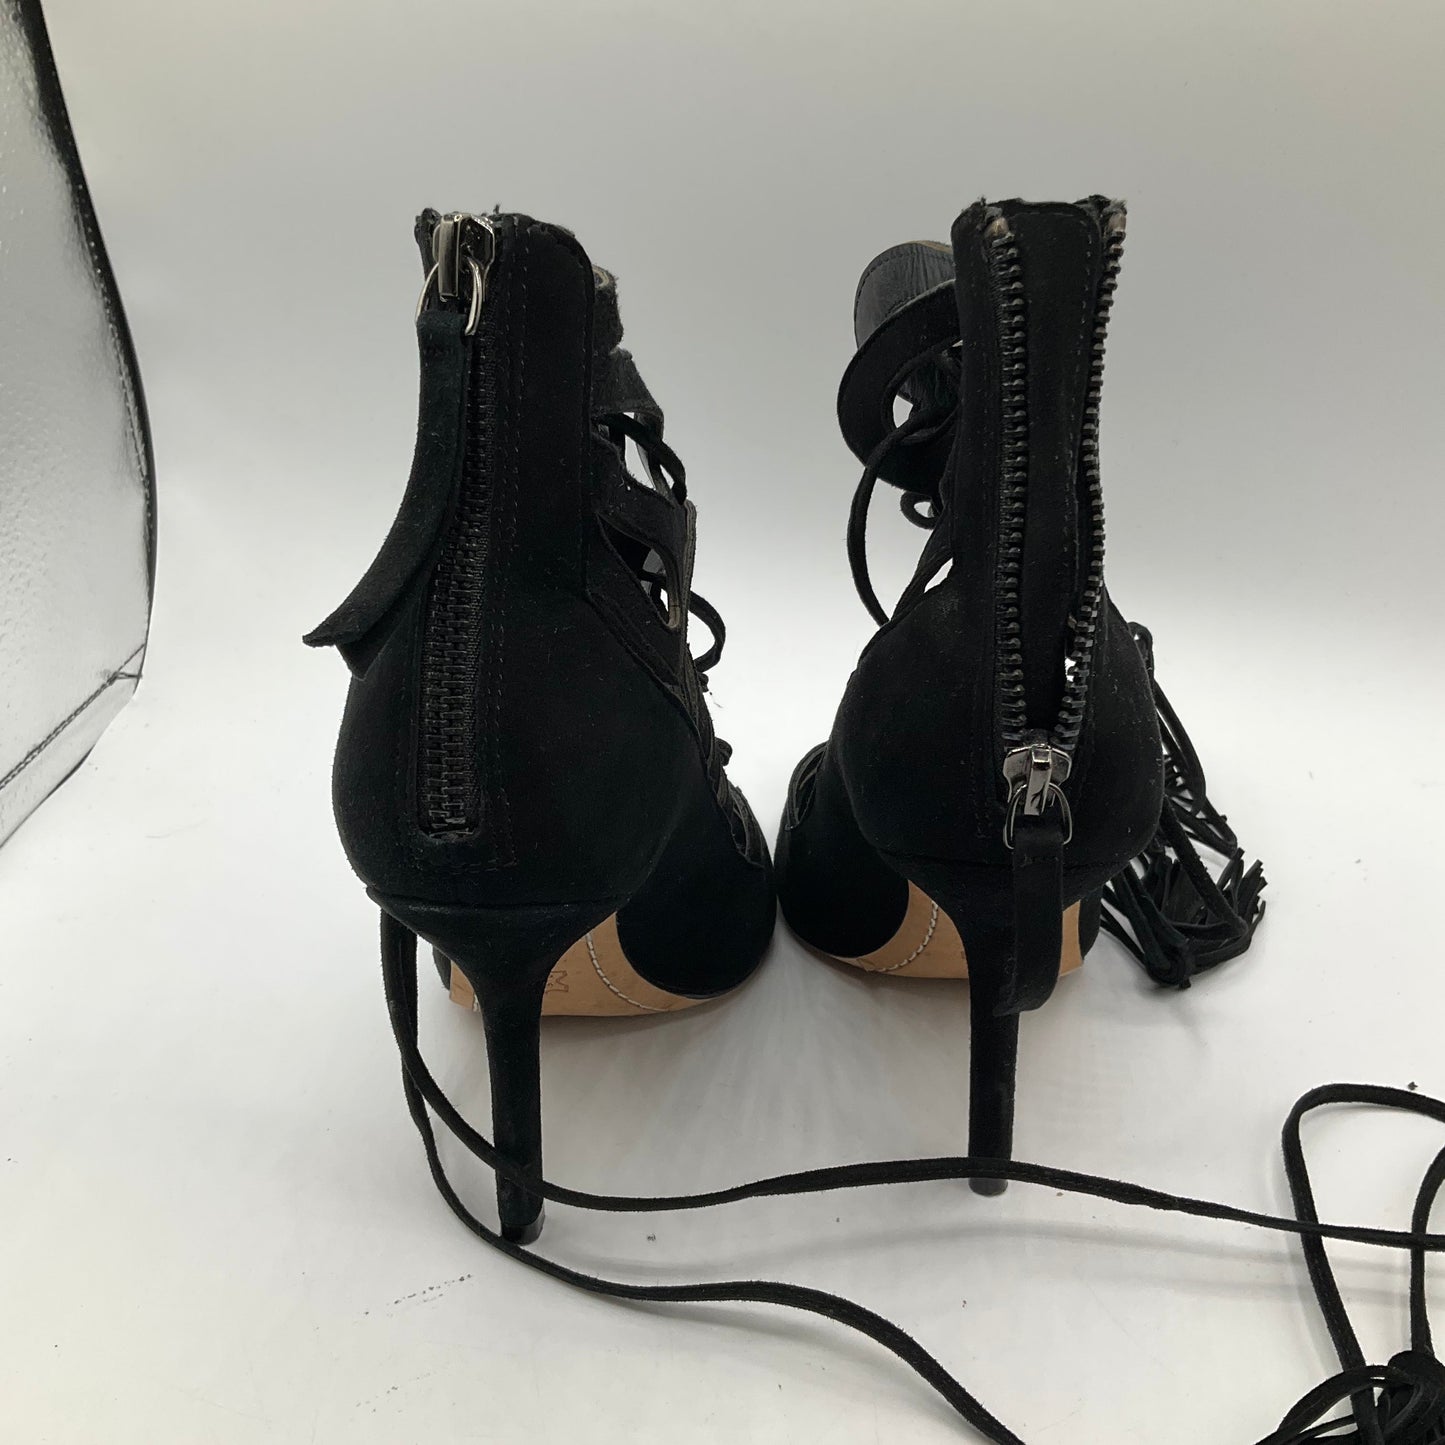 Sandals Heels Stiletto By Alice + Olivia  Size: 6.5